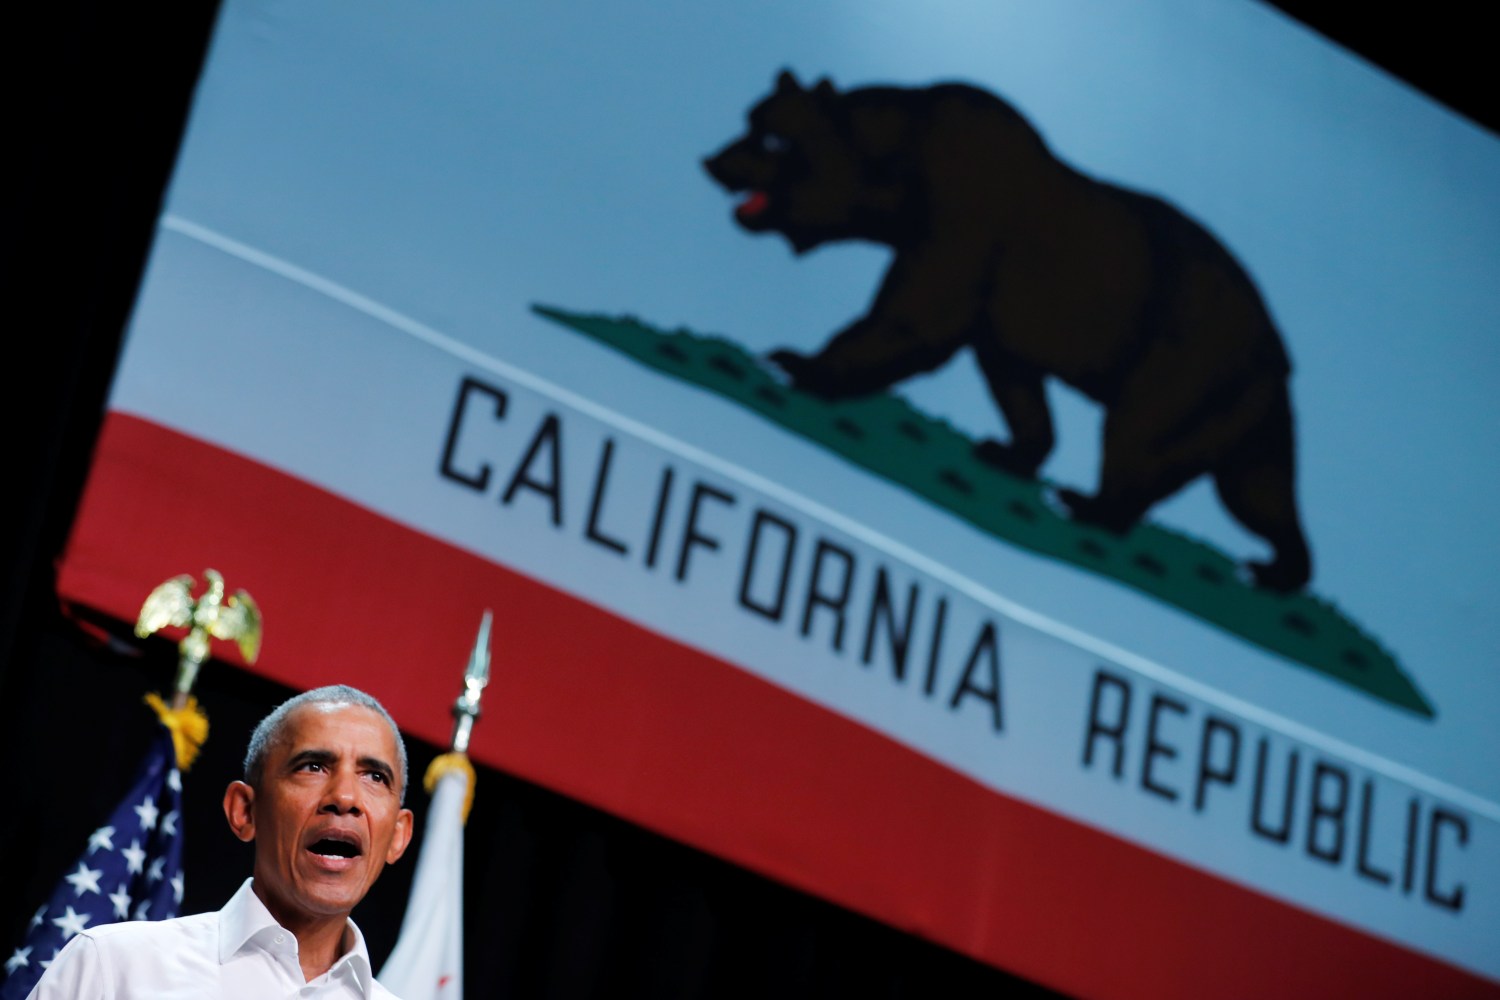 Former U.S. President Barack Obama participates in a political rally for California Democratic candidates during a event in Anaheim, California, U.S. September 8, 2018. REUTERS/Mike Blake - RC1D42A395D0